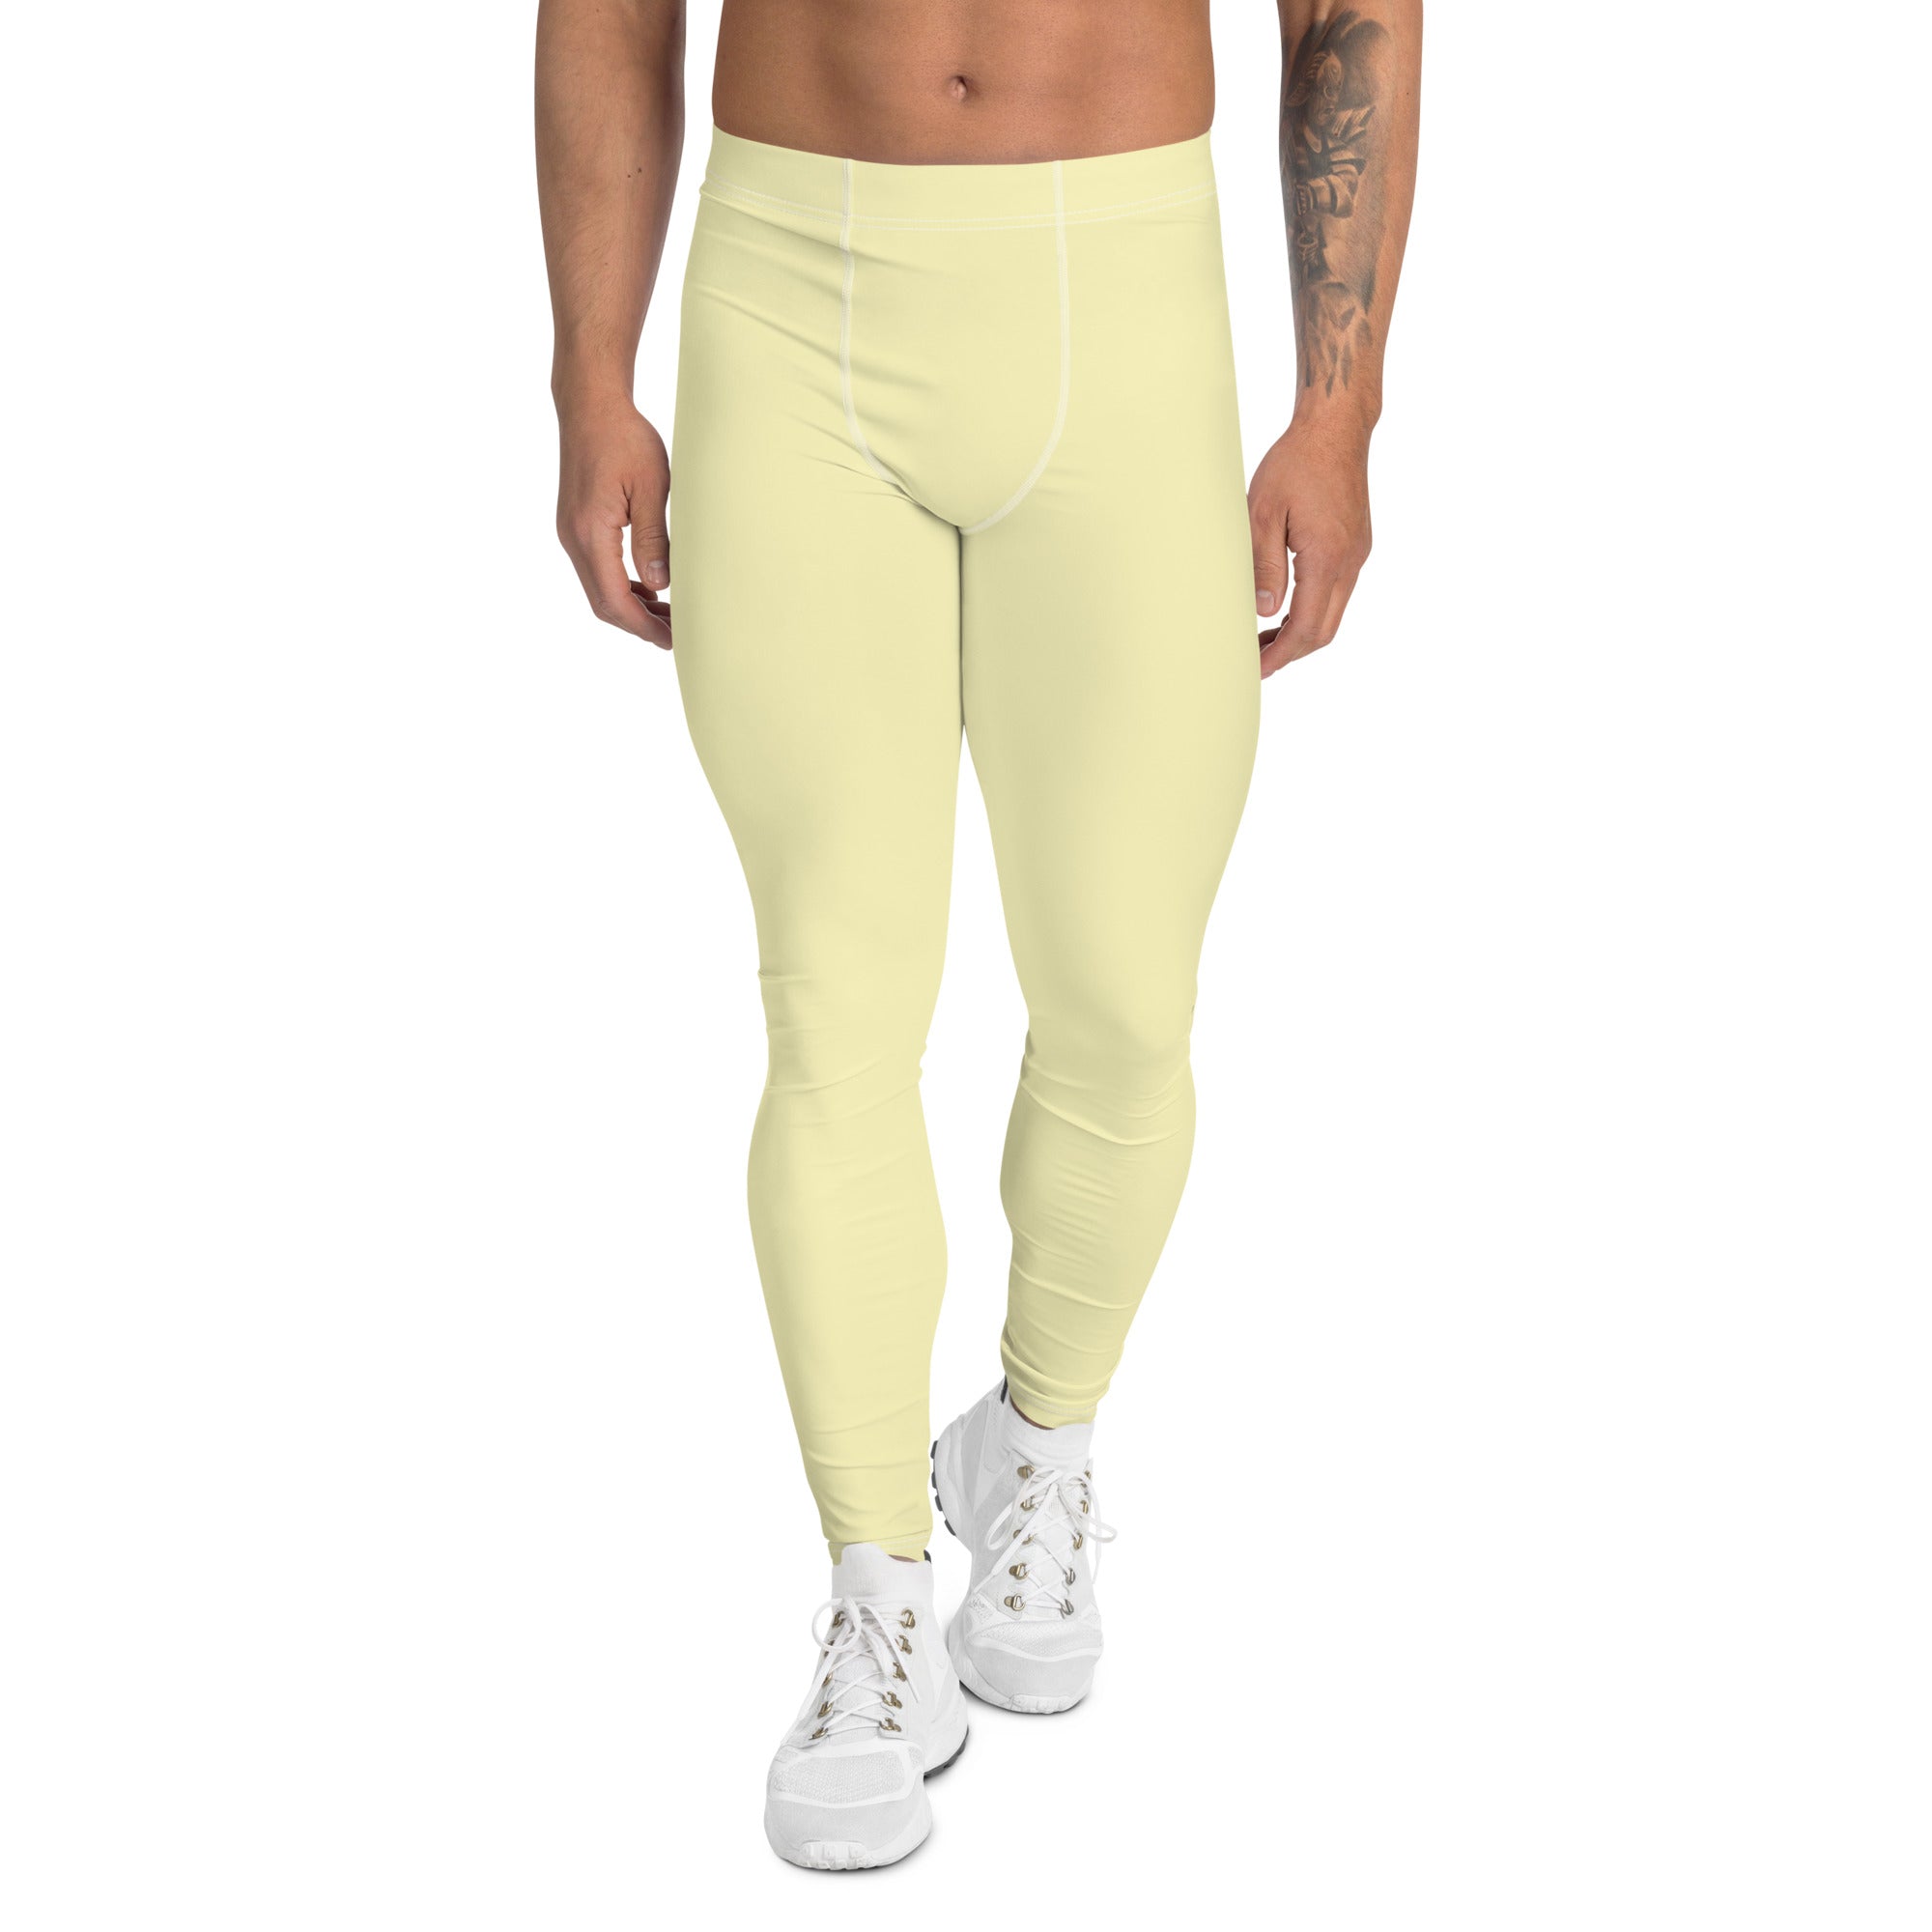 Pale Yellow Color Meggings, Solid Yellow Color Print Sexy Meggings Men's Workout Gym Tights Leggings, Men's Compression Tights Pants - Made in USA/ EU/ MX (US Size: XS-3XL) 